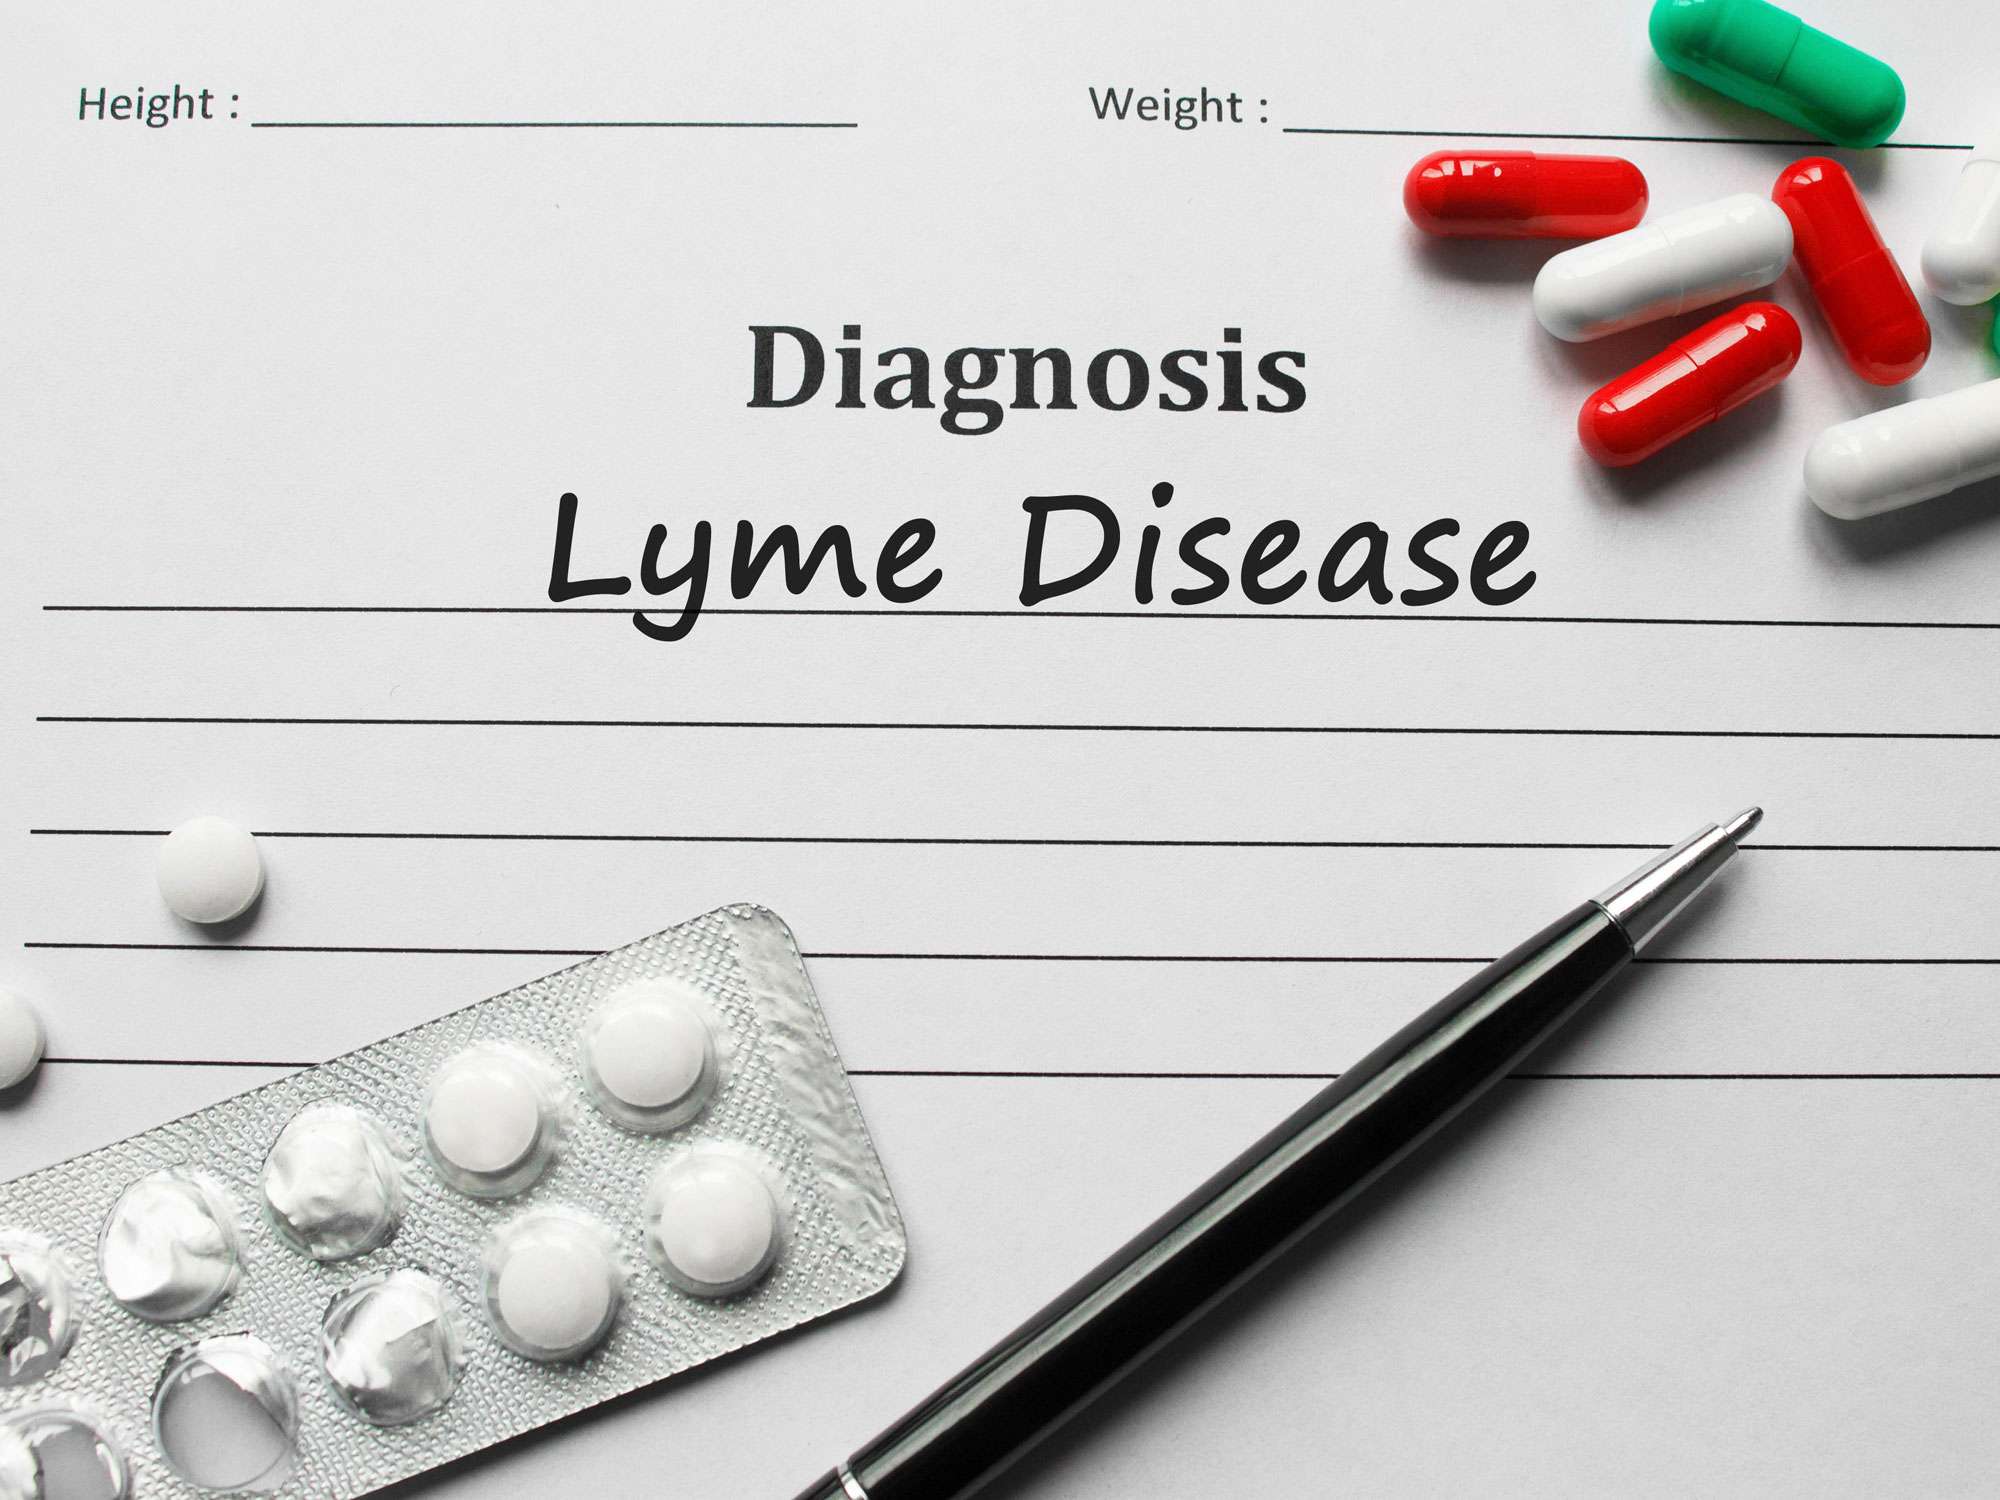 The case for chronic Lyme disease: Another antibiotic fail ...